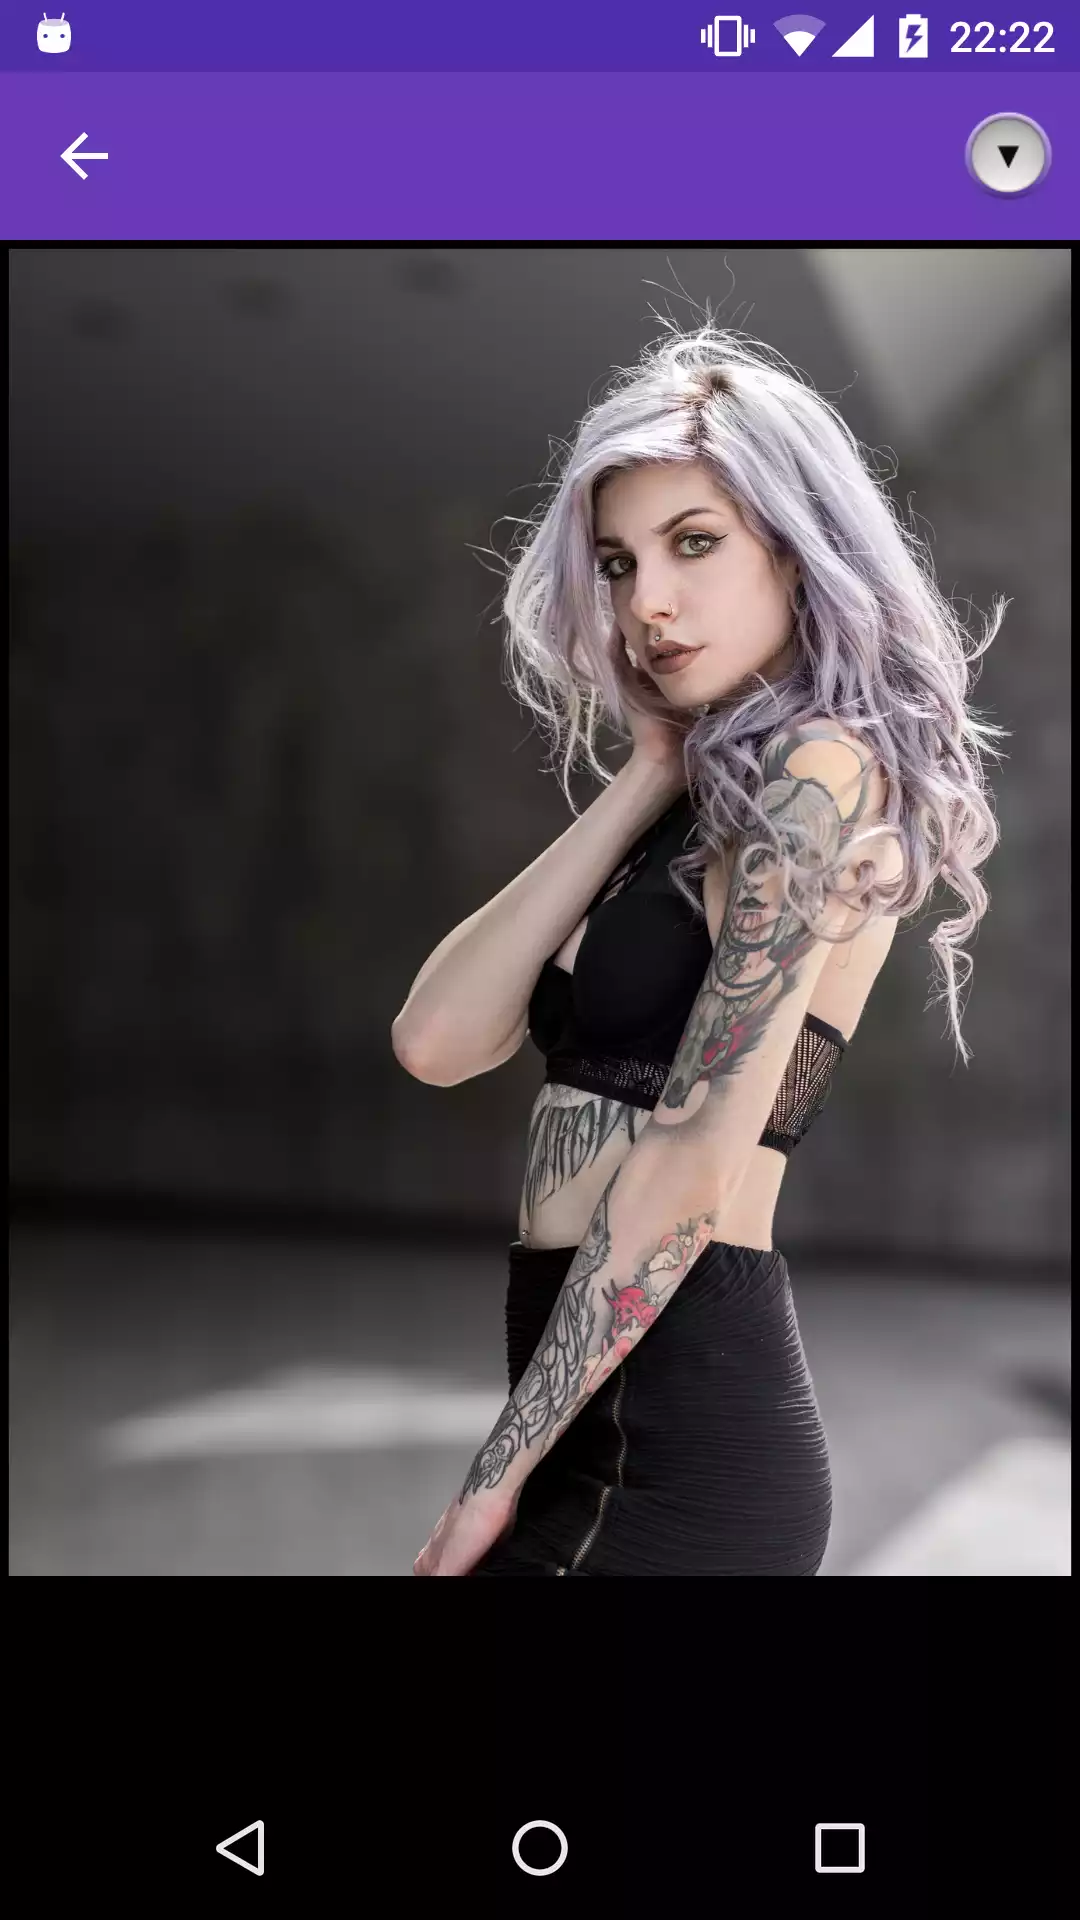 Tattoo Wallpapers sexy,for,erotic,download,anime,manga,porn,best,picture,wallpapers,pics,girls,sex,apps,tattoo,stacy,amateur,hentai,pic,app,adams,pornstars,adult,android,perfectshemales